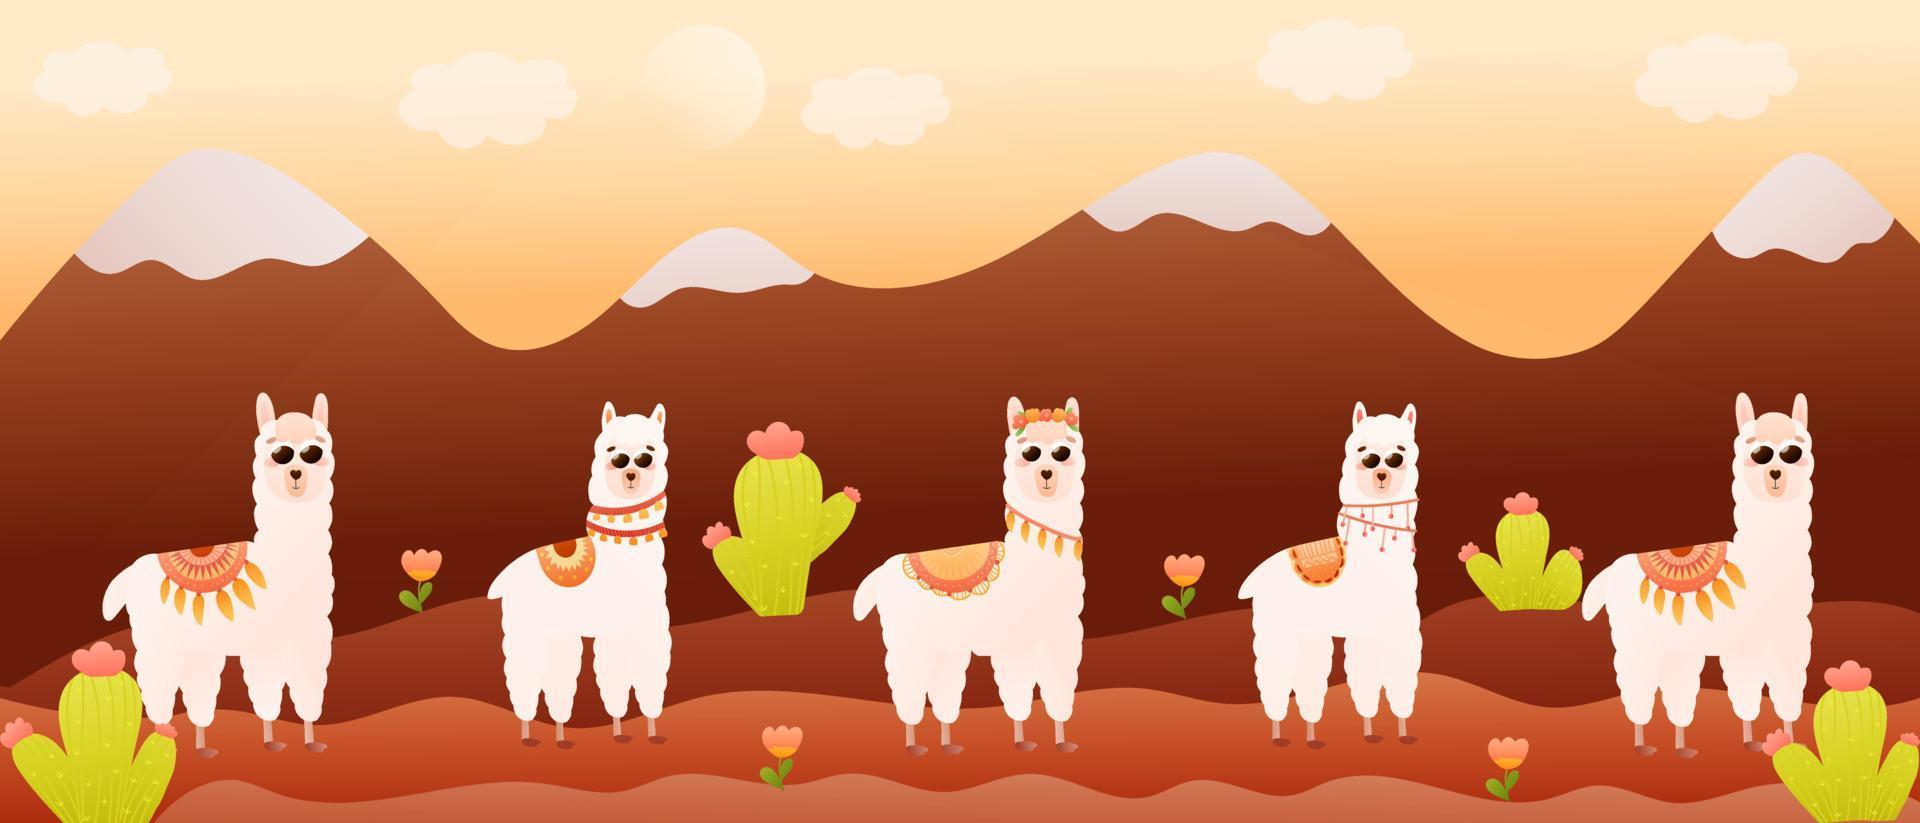 Colourful mountains landscape with cute llamas characters and cactuses, banner for travelling, wild nature vector